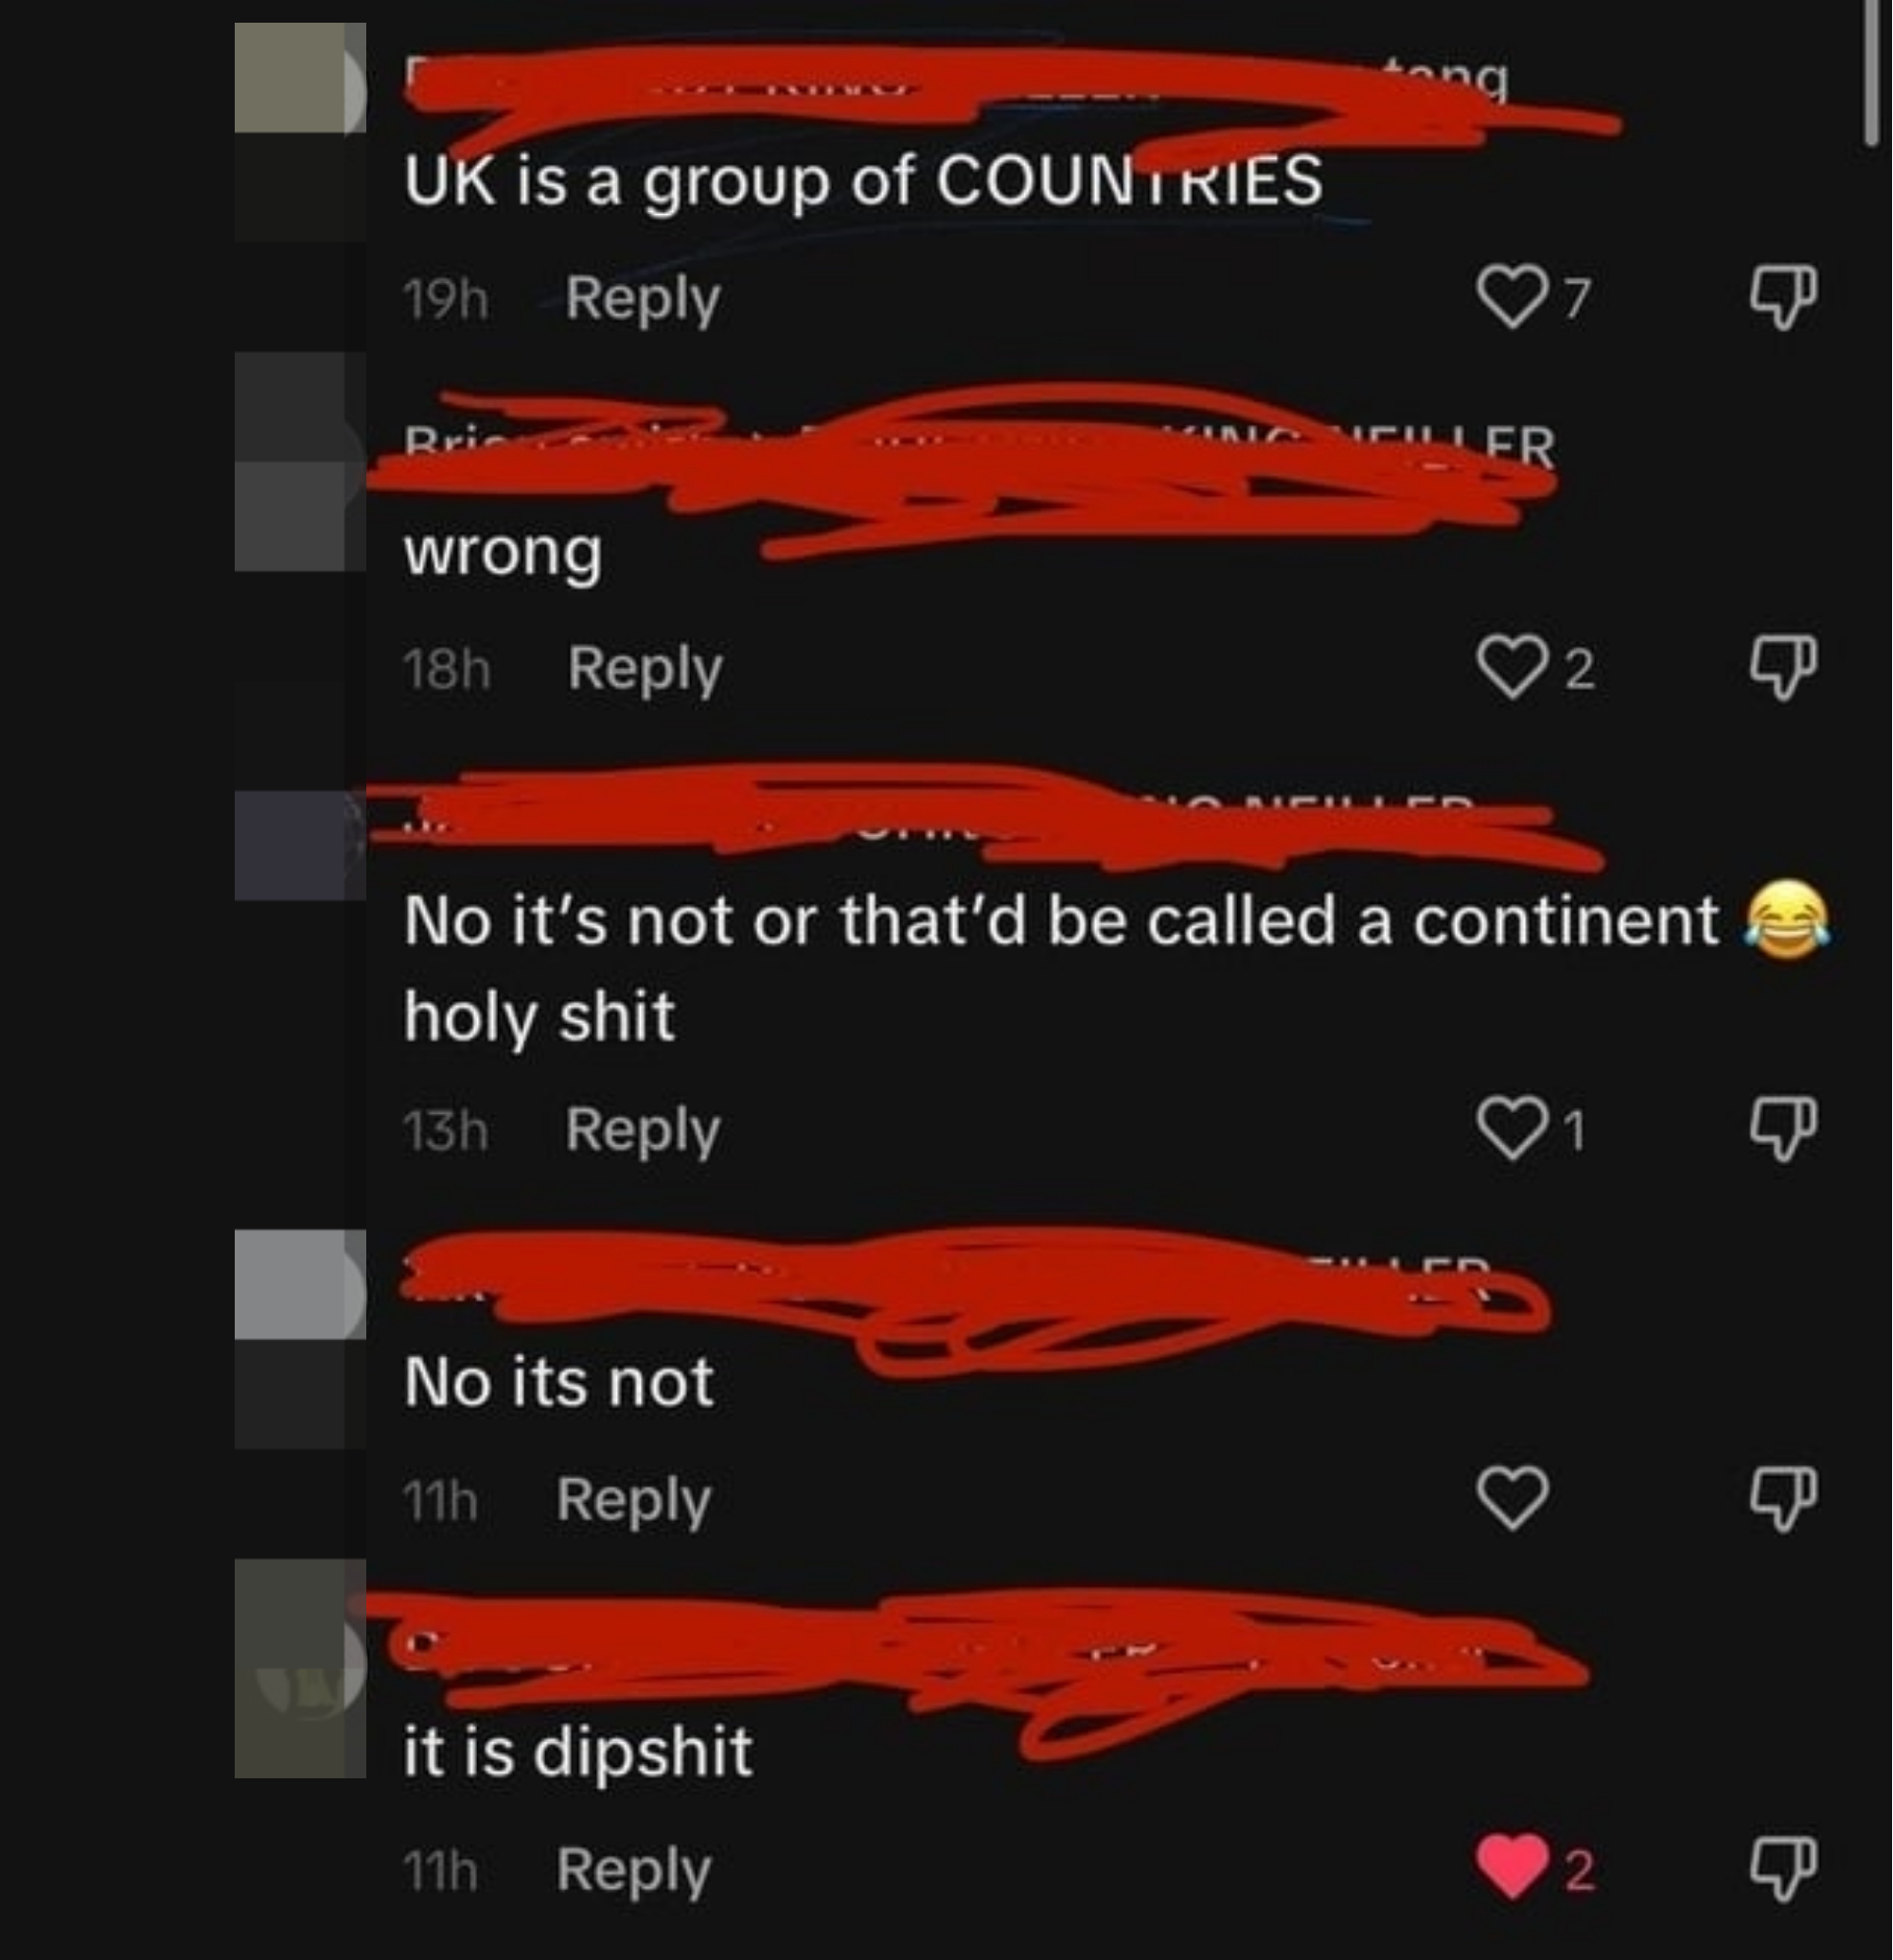 people confused that the UK is a group of countries, some saying it&#x27;s not or else it&#x27;d be called a continent